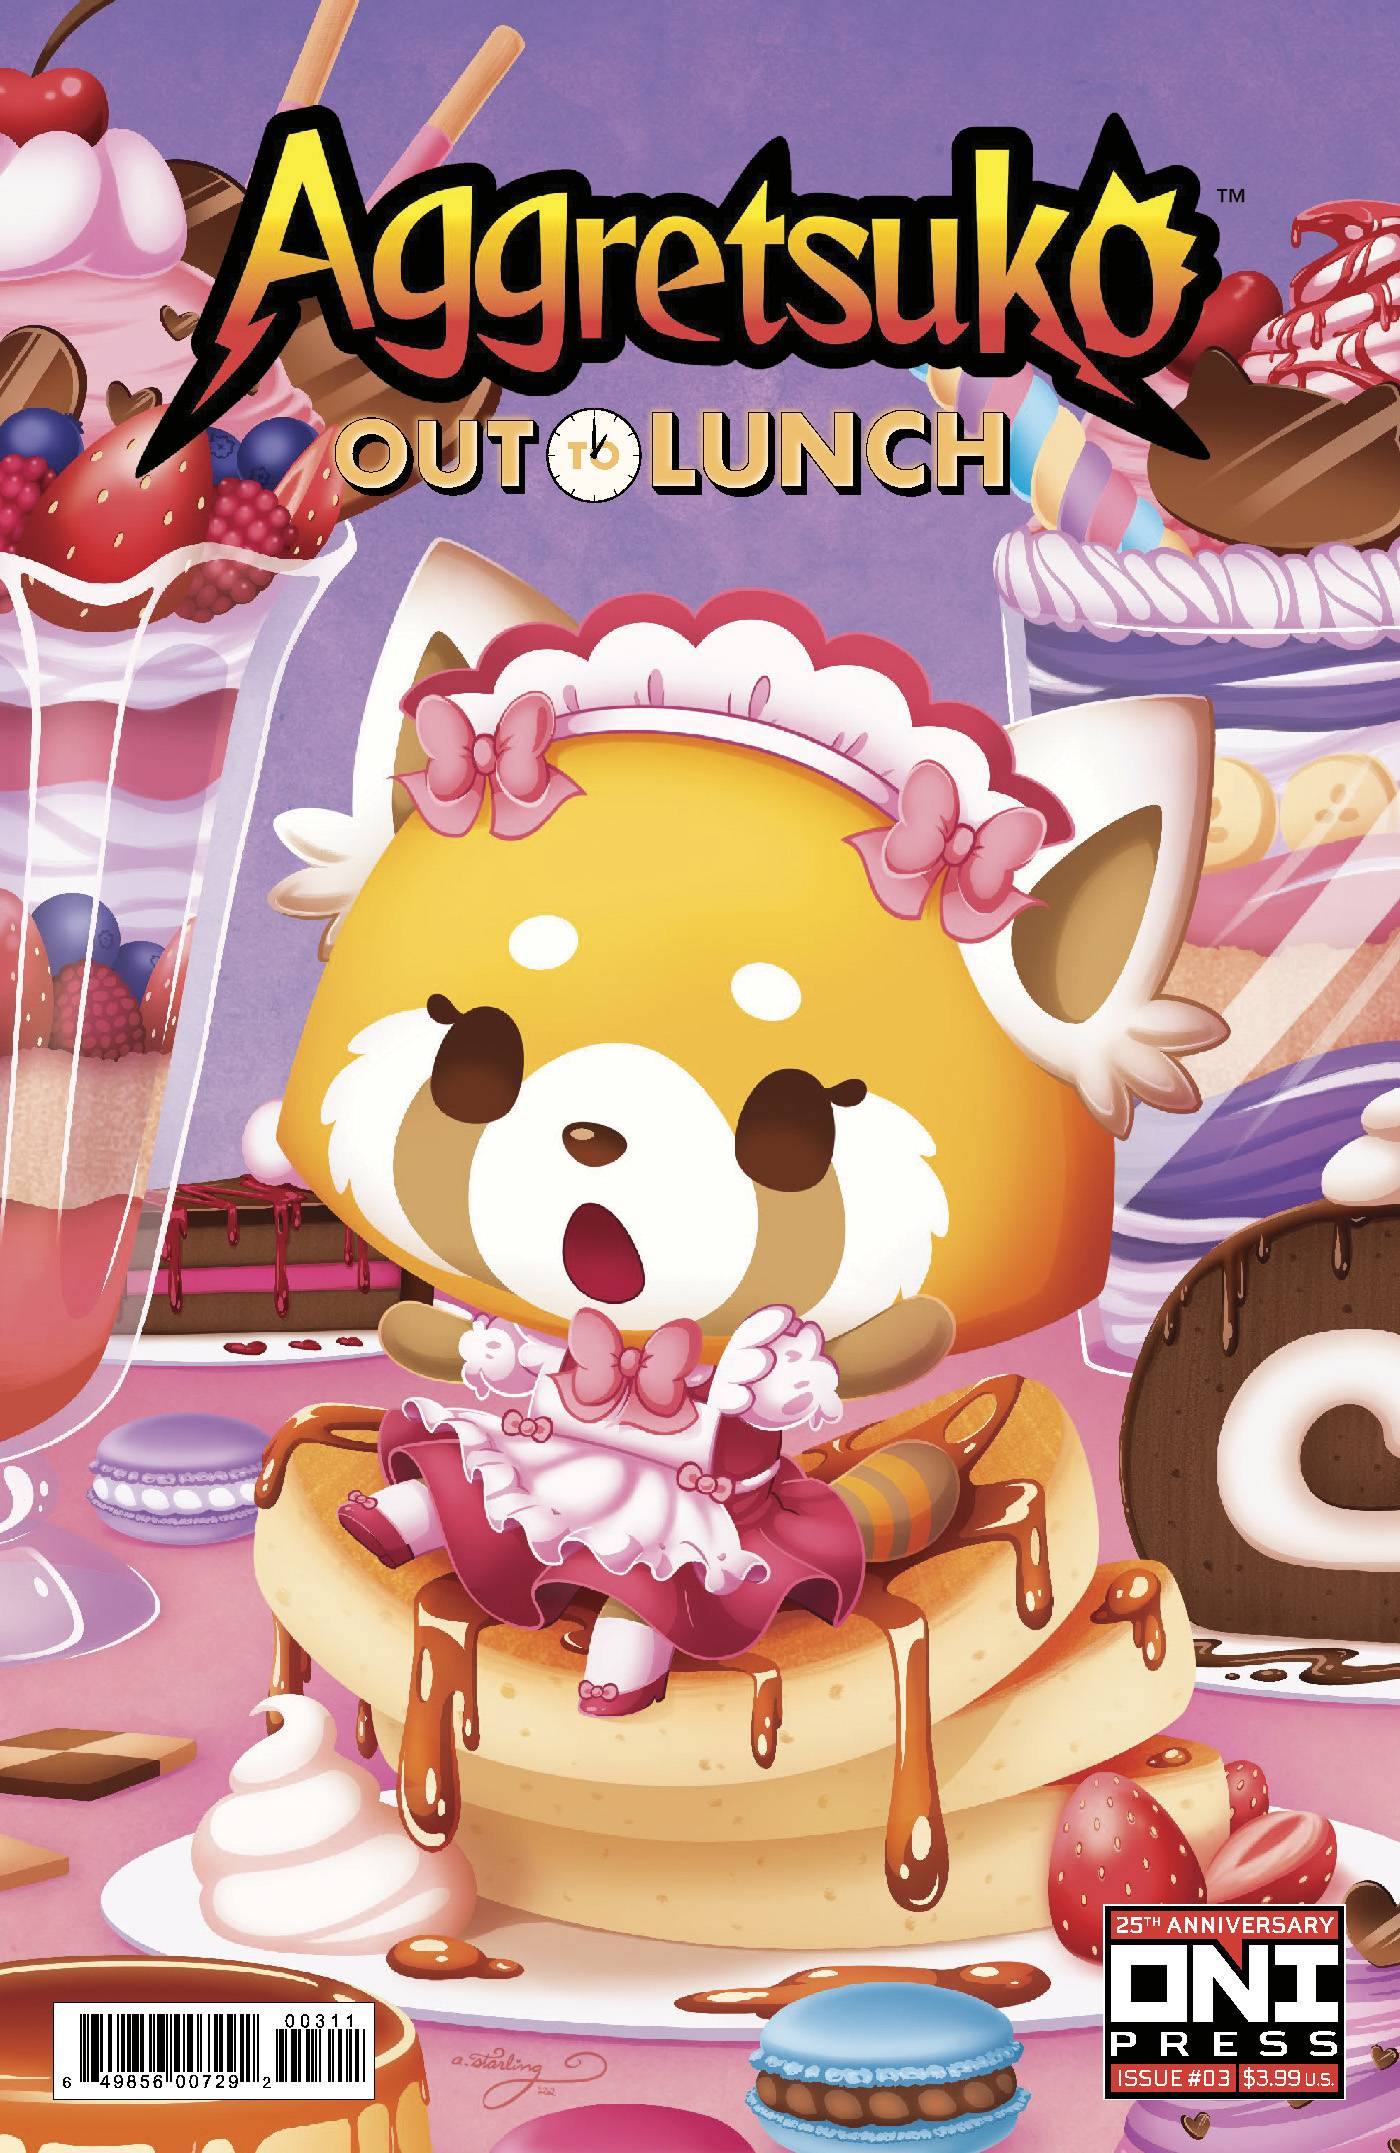 AGGRETSUKO OUT TO LUNCH